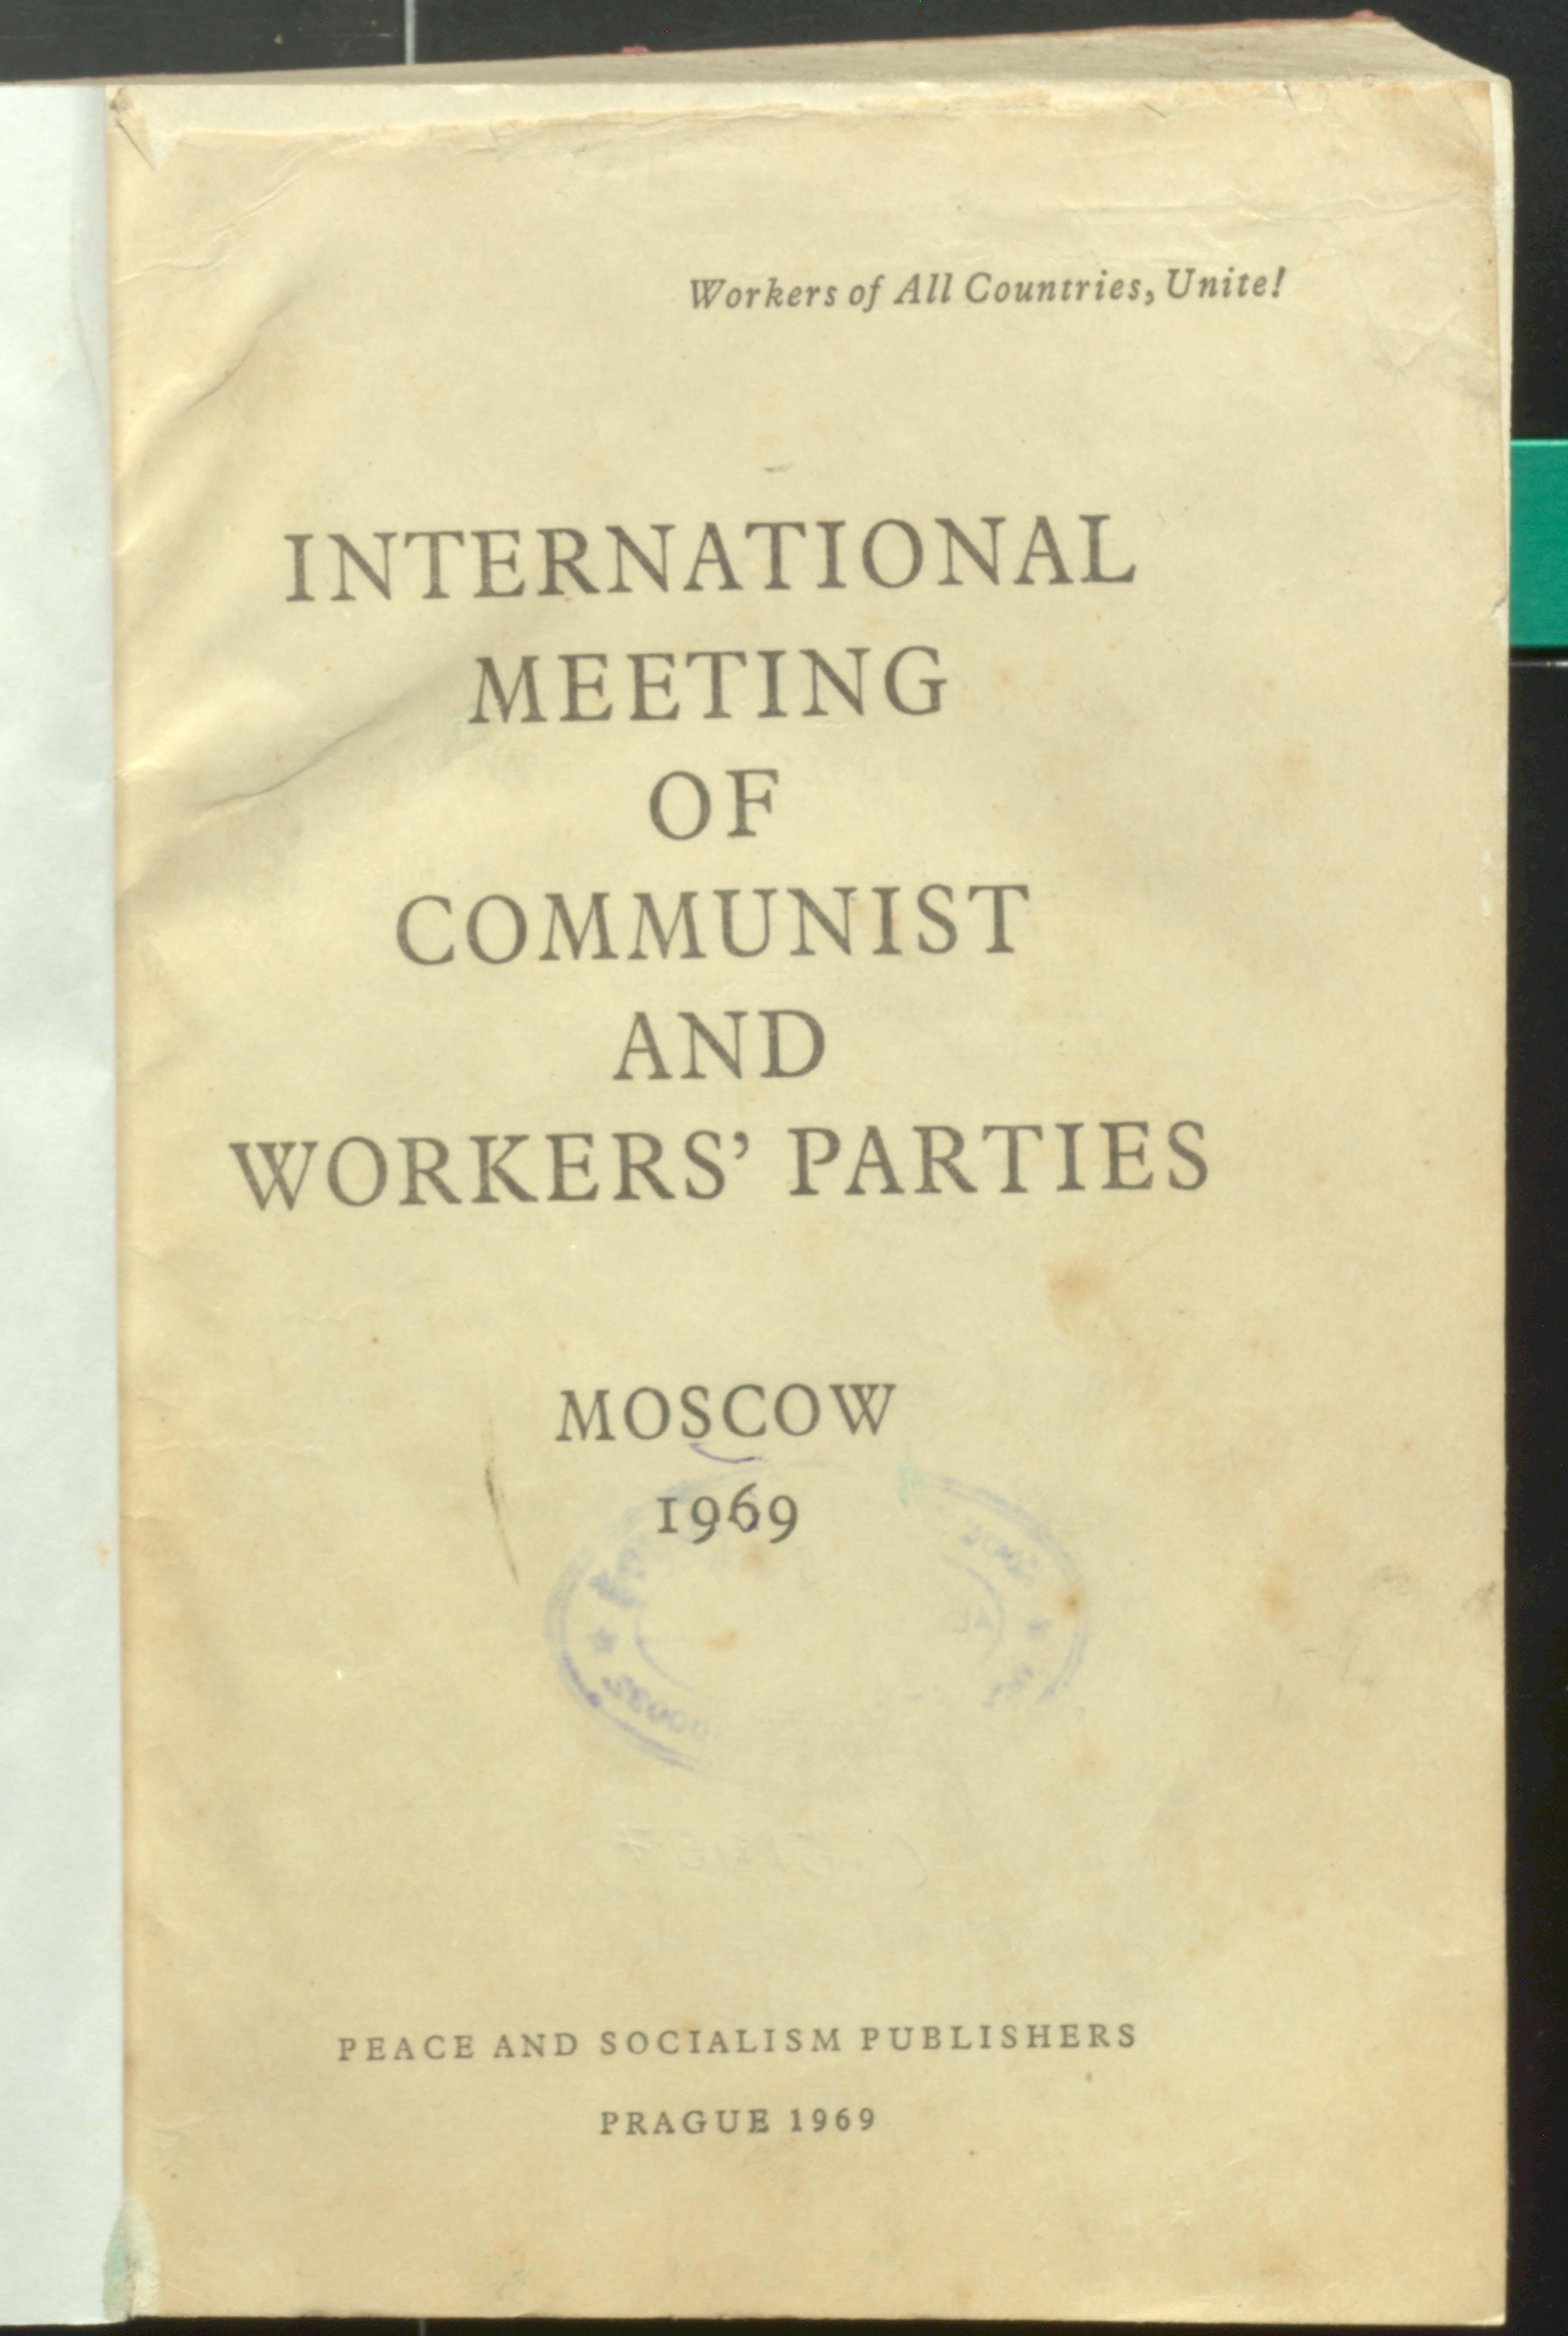 International meeting of communist and worker's parties